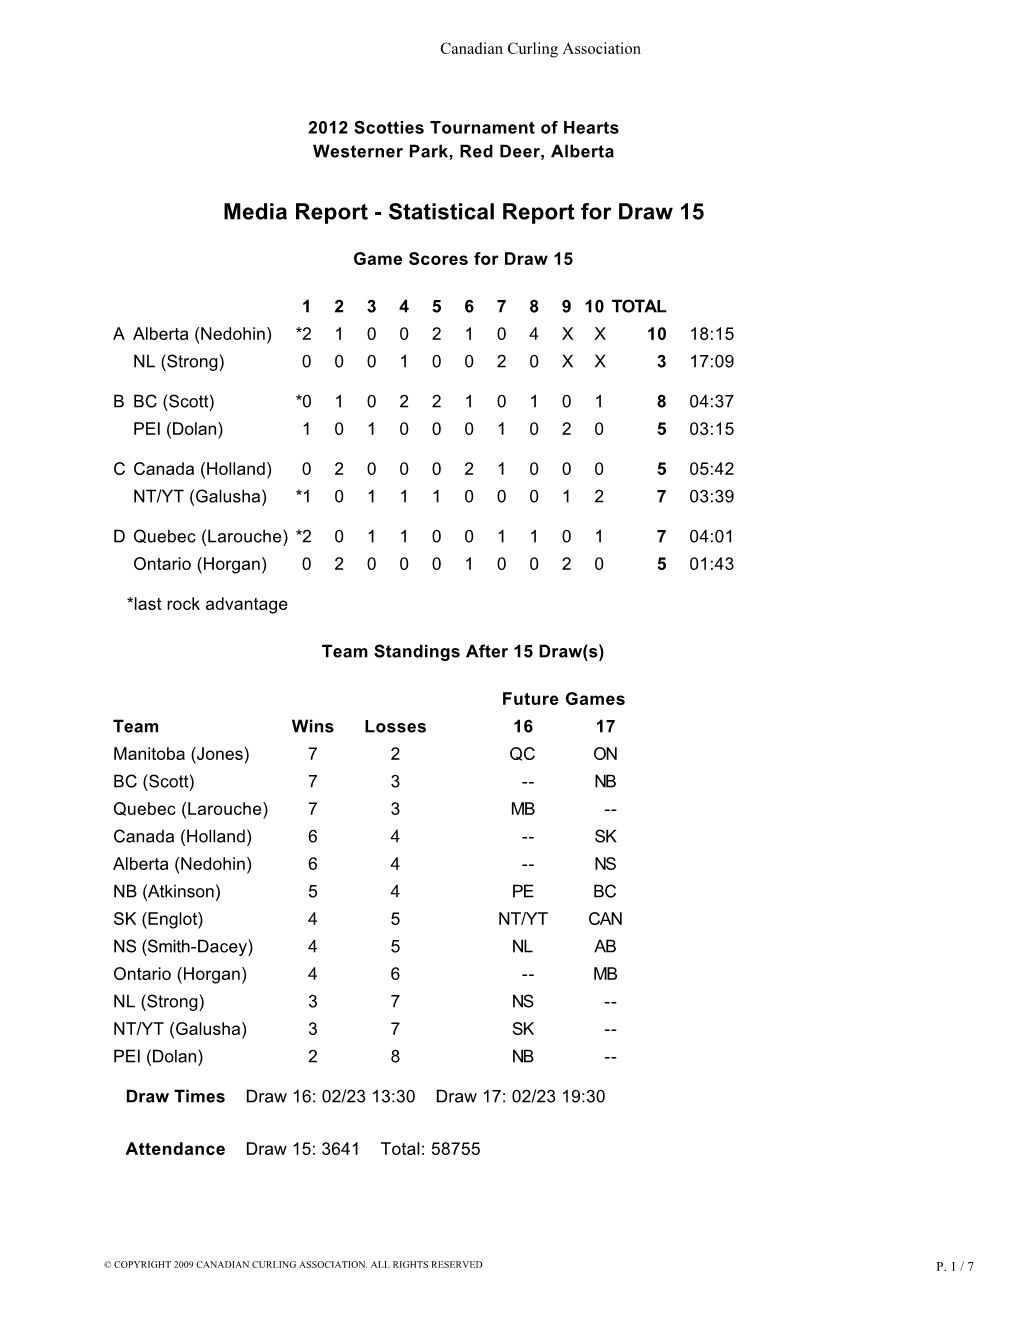 Media Report Statistical Report for Draw 15